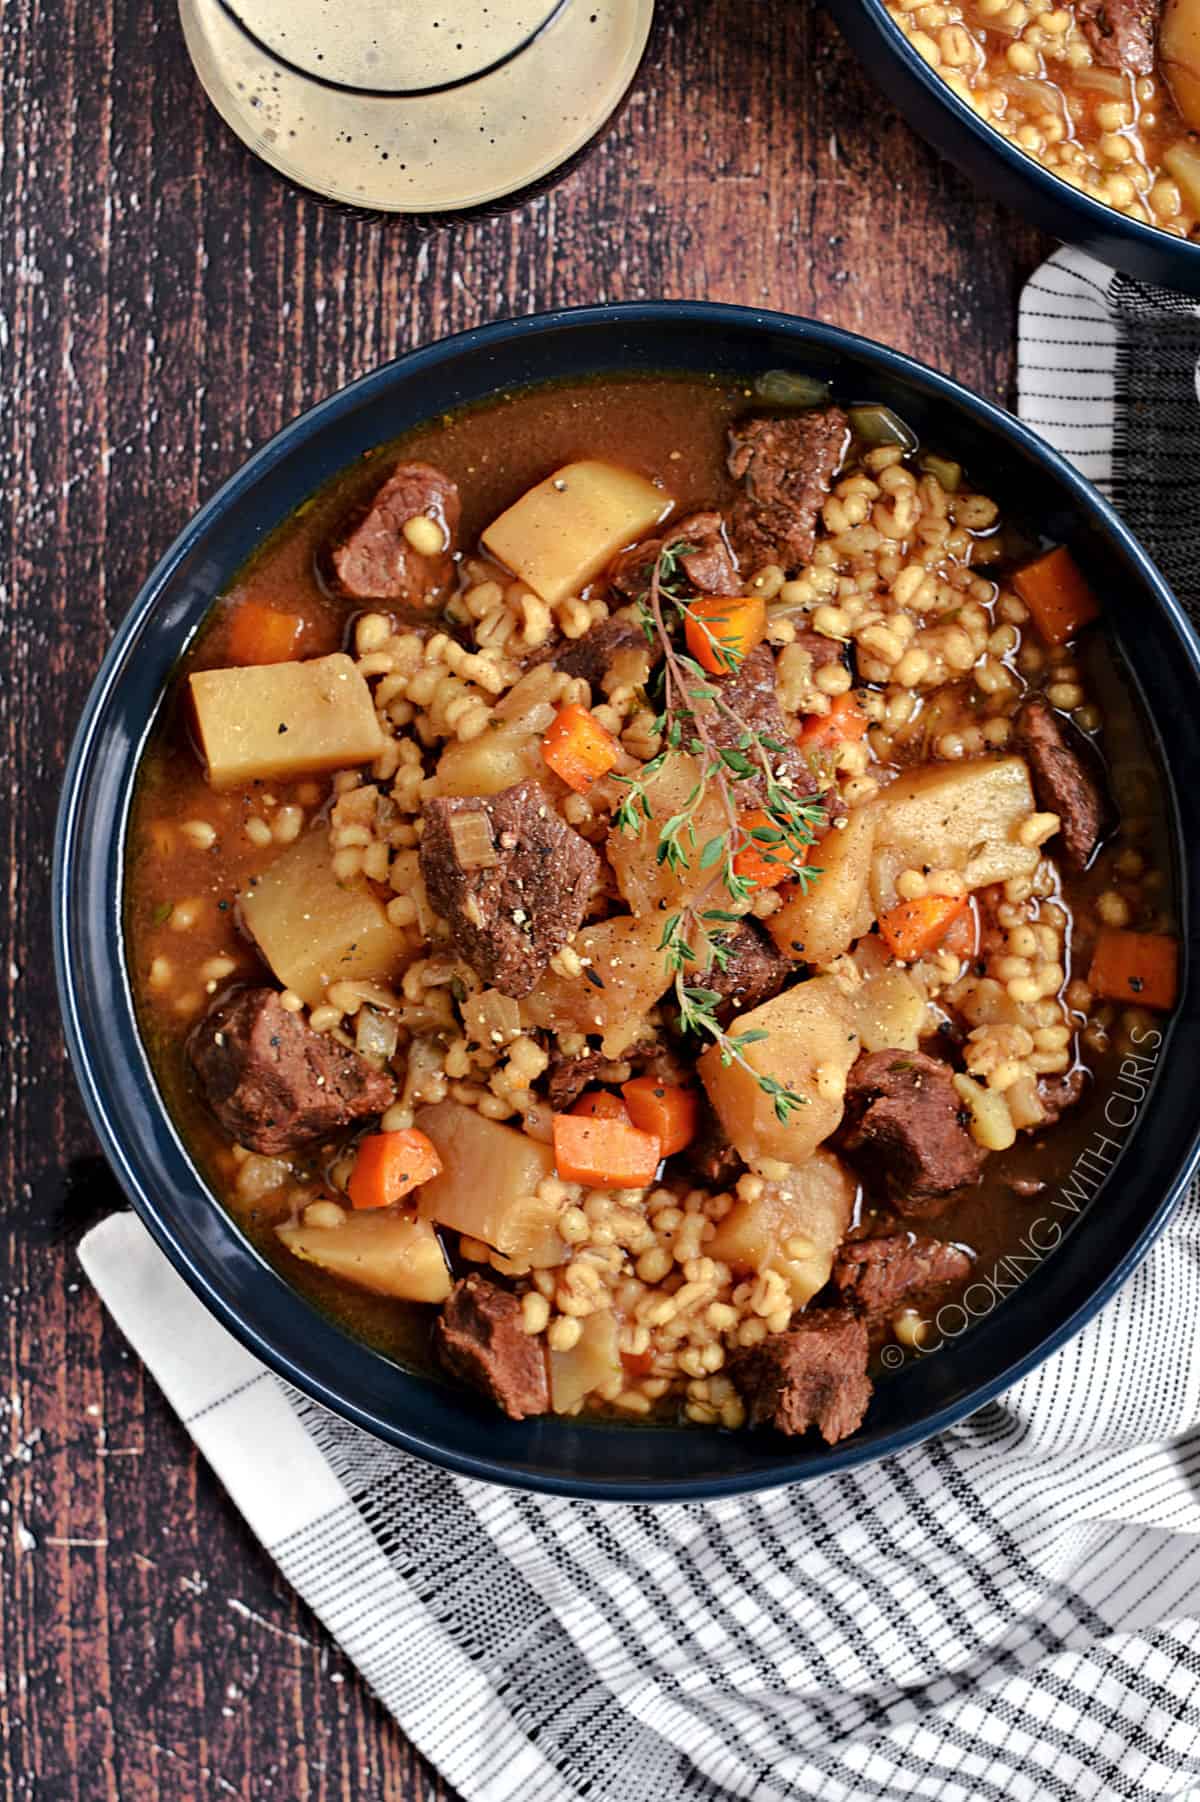 Looking down on a big blue bowl of beef, potato and carrots chunks surrounds by broth and barley.